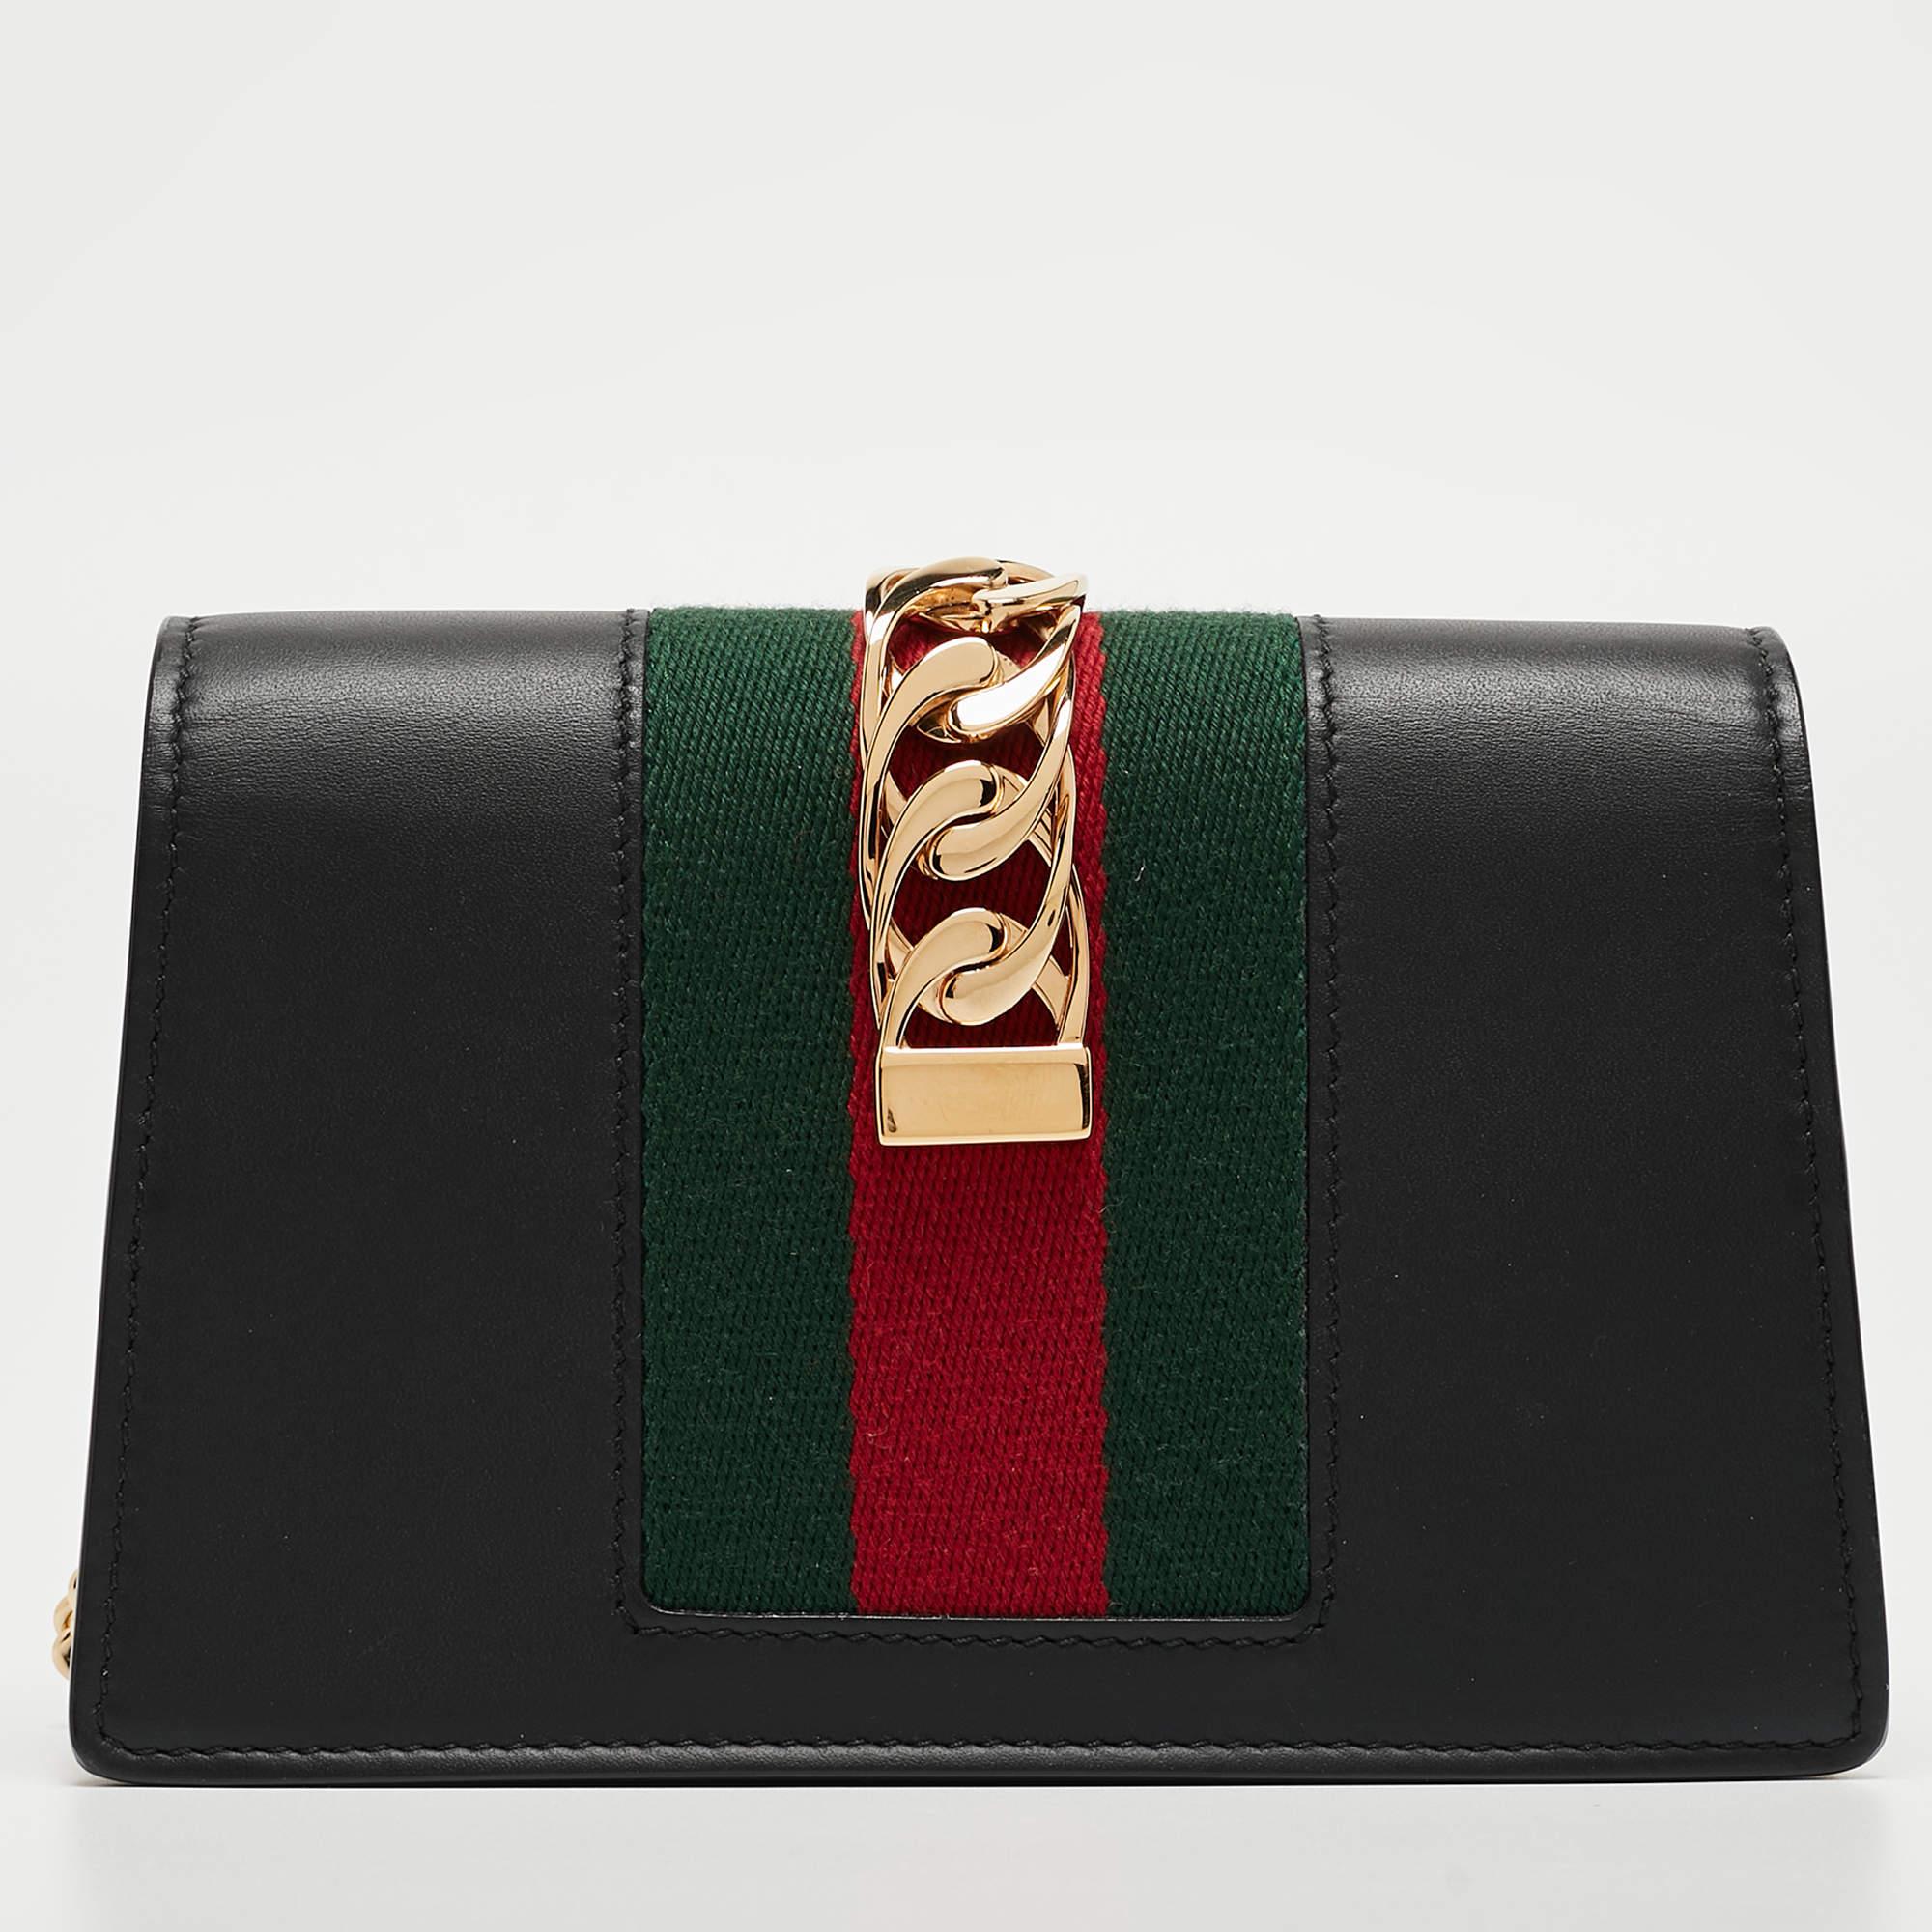 From the house of Gucci comes this gorgeous Sylvie shoulder bag that will perfectly complement all your outfits. It has been luxuriously crafted from leather and styled with a chain-web decorated flap and a buckle lock to secure the suede interior.